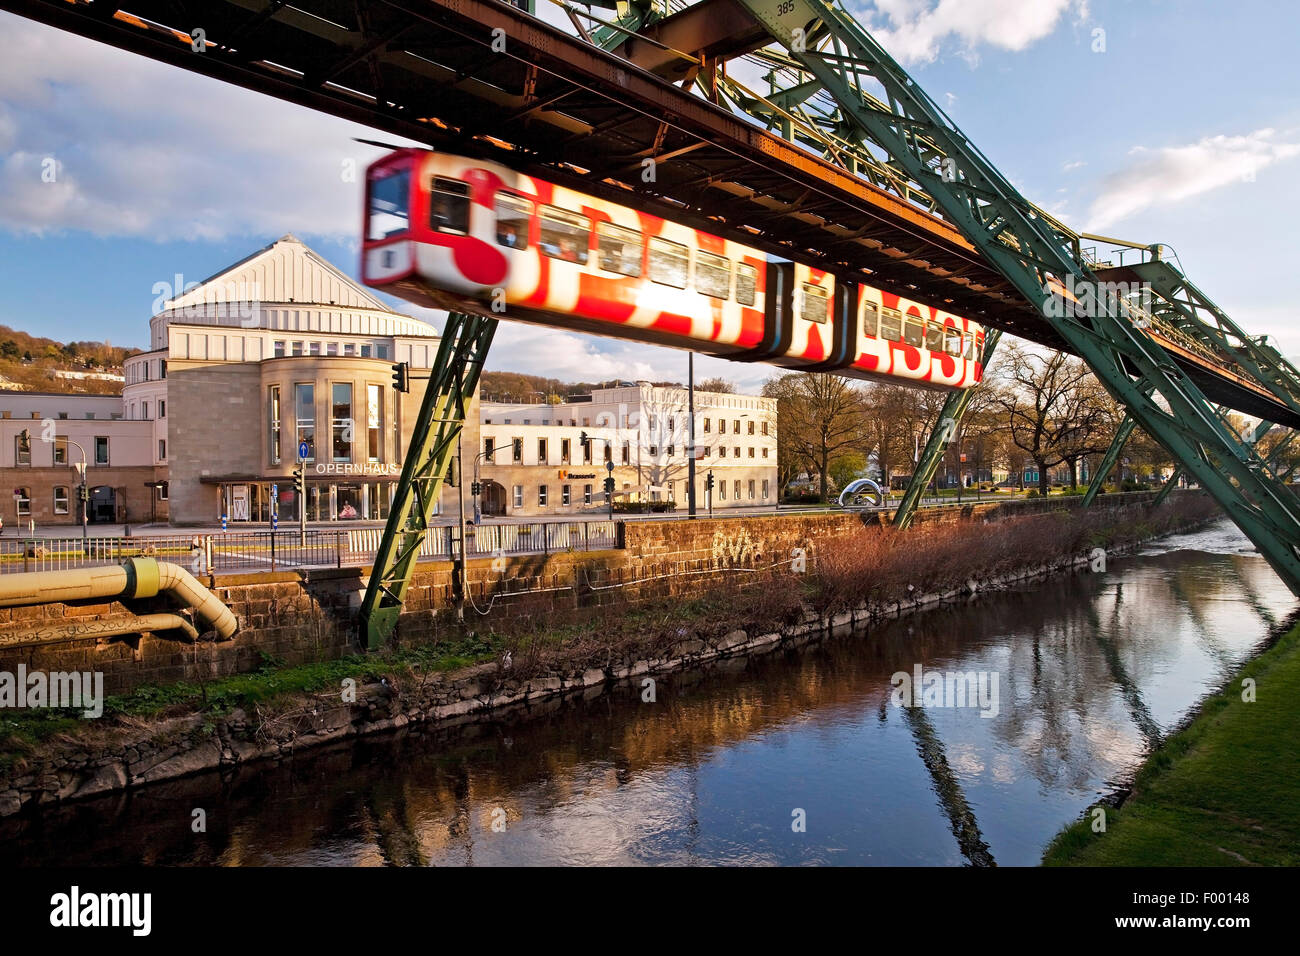 Wuppertal Suspension Railway with opera house and river Wupper, Germany, North Rhine-Westphalia, Bergisches Land, Wuppertal Stock Photo